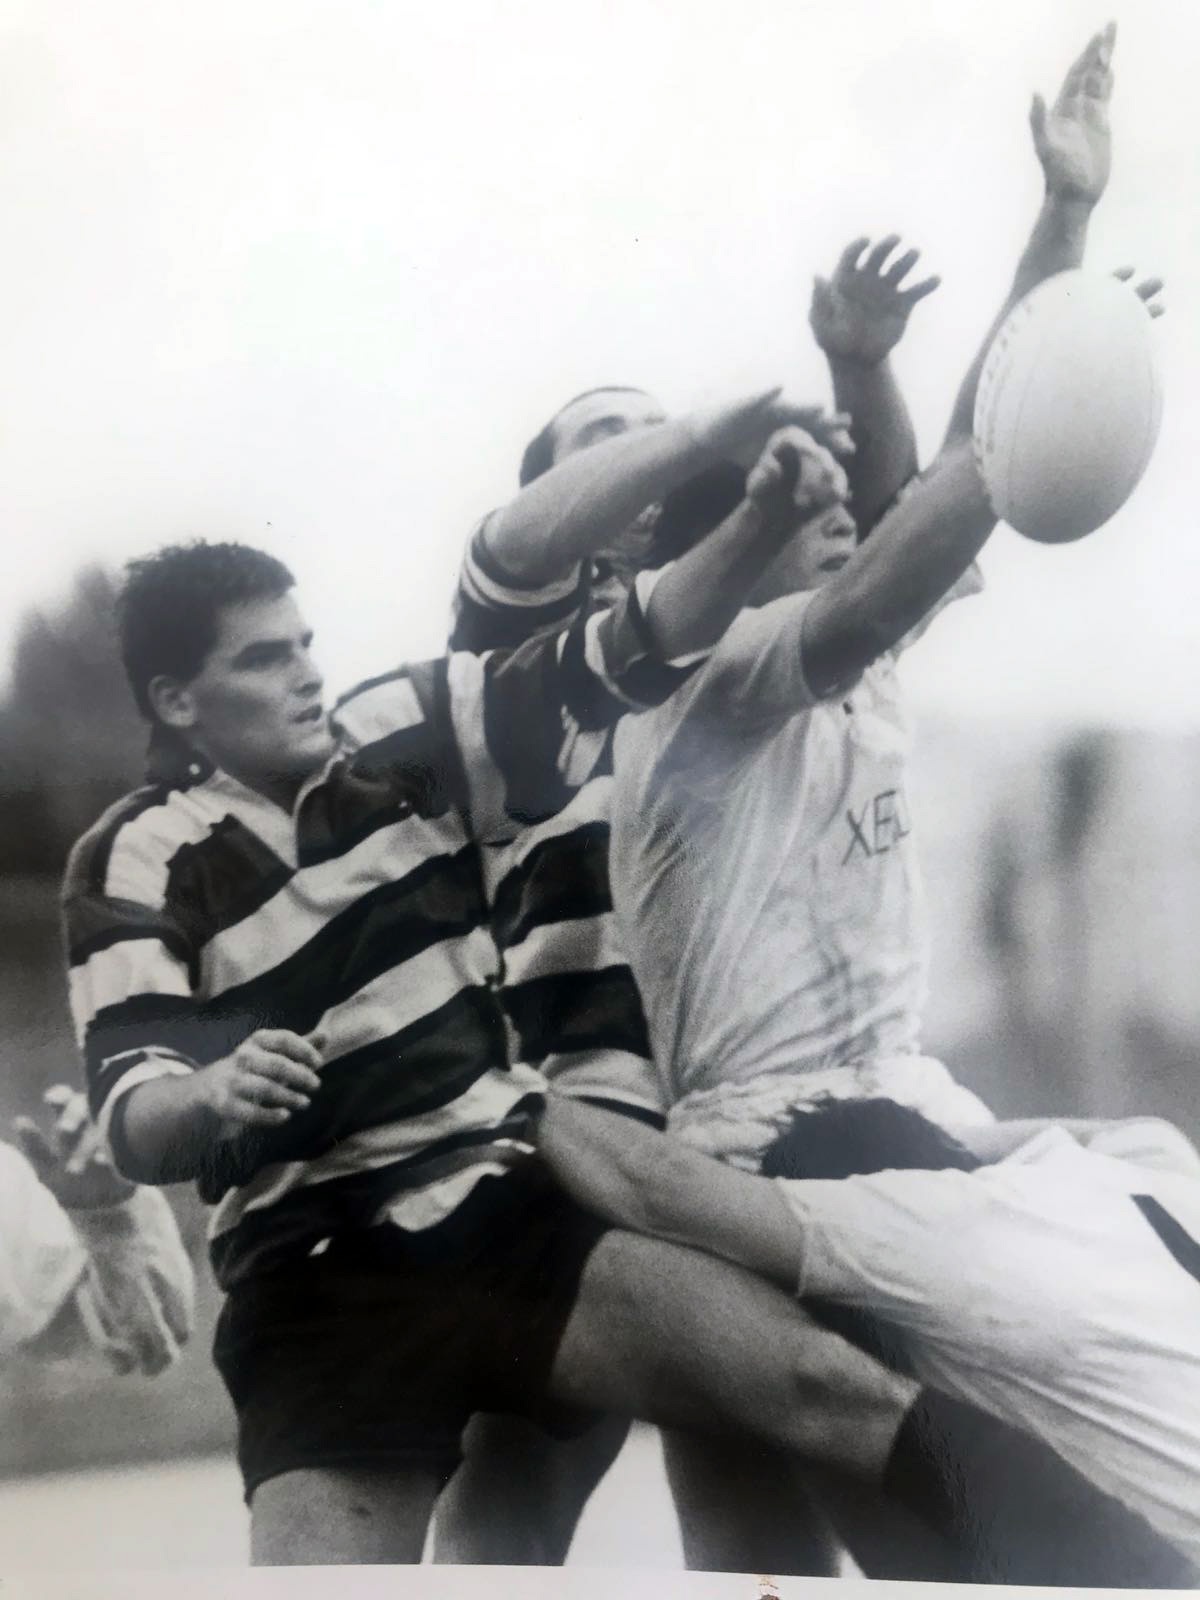 javier-lopez-rugby